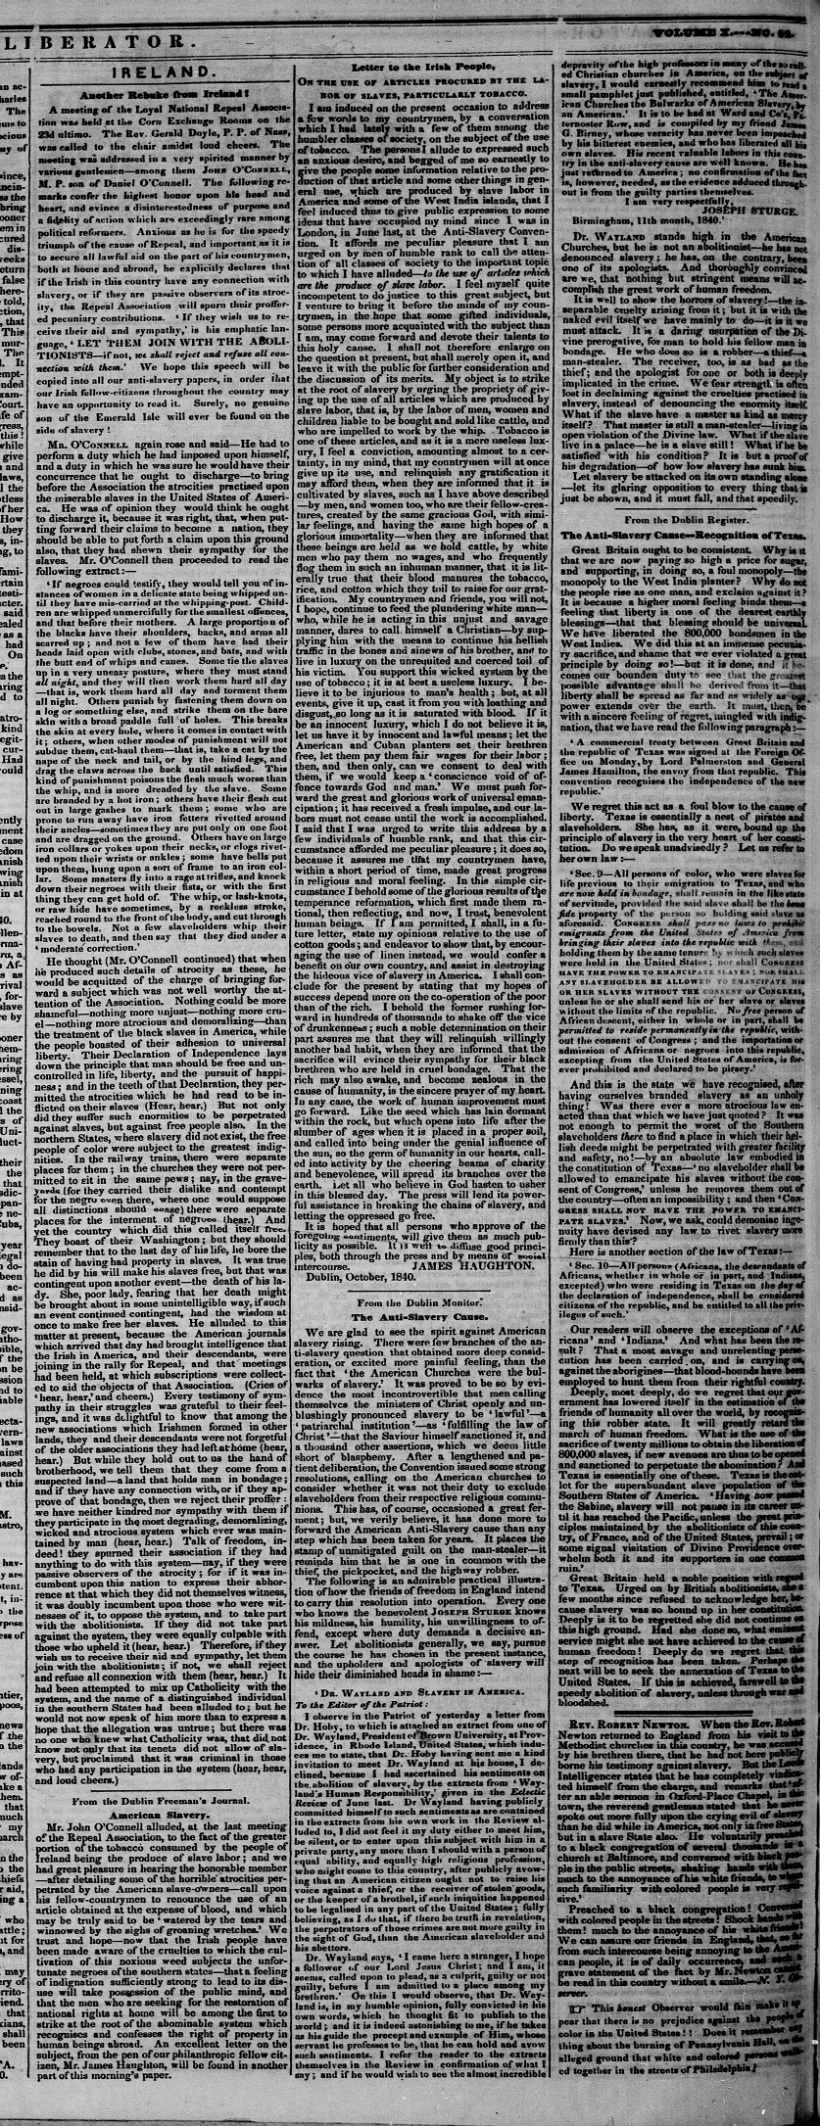 THE LIBERATOR, CHRISTMAS DAY, 25 DEC 1840, PAGE 2, SECTION 2